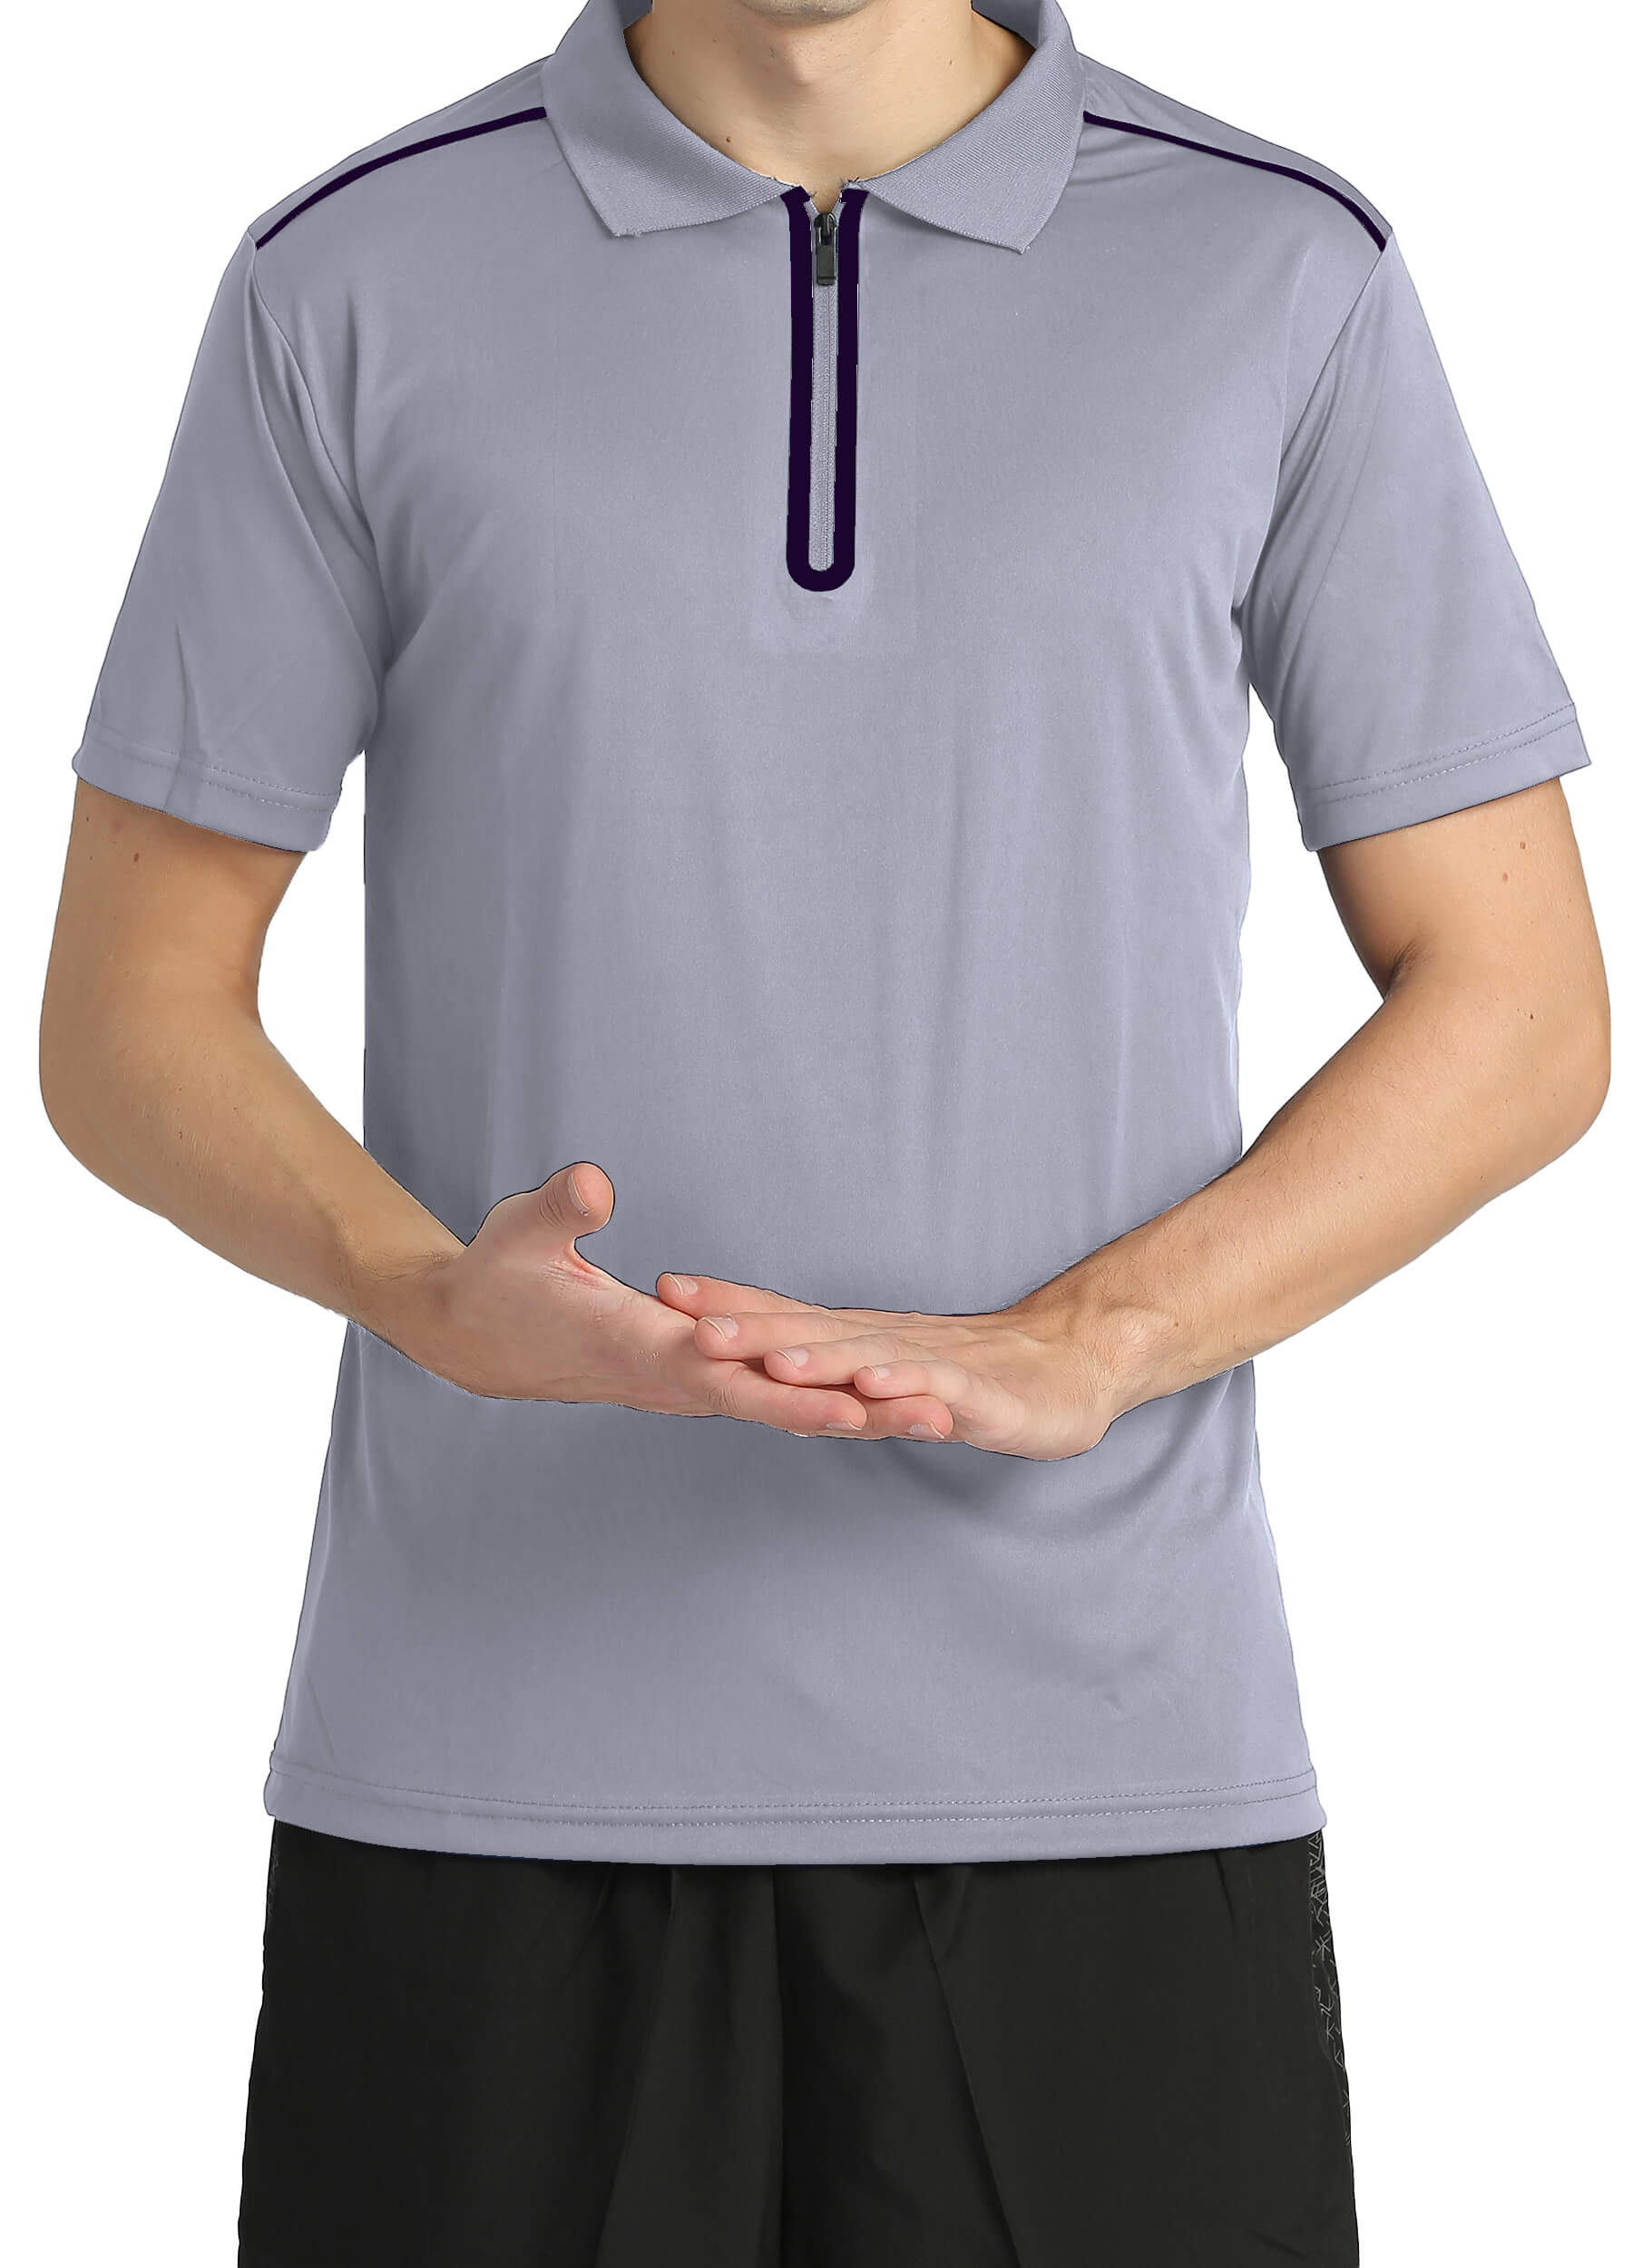 4POSE Men's Light Grey Moisture Wicking Quick Dry Golf Workout Polo Shirt (Clearance)